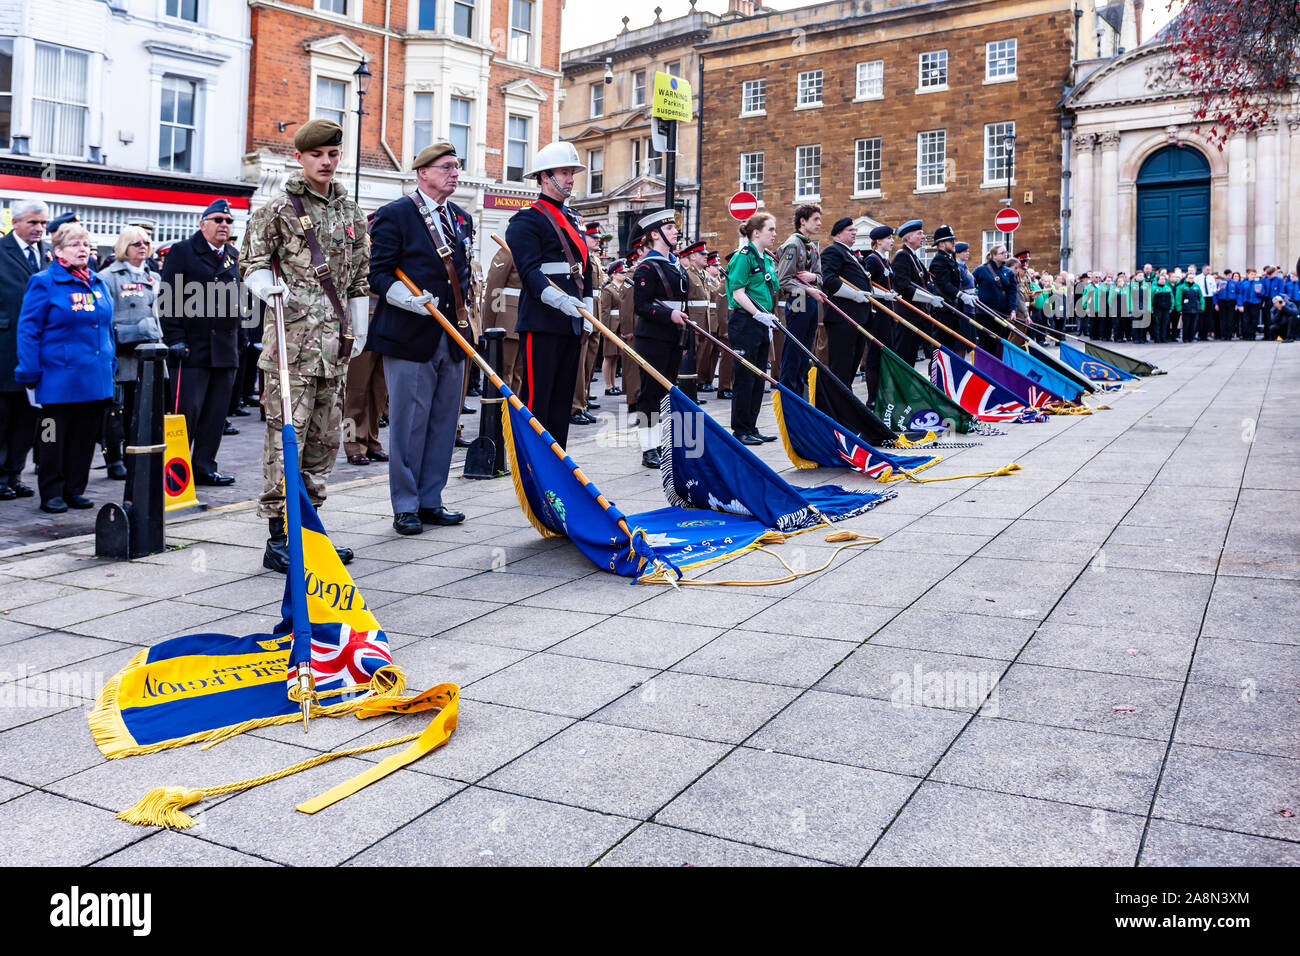 Northampton, UK. 10th November 2019. Northampton honours members of the armed forces who have lost their lives in the line of duty with a Remembrance Day parade. The Northampton Pipe Band and the Air Training corps Band lead the parade around the town. Credit: Keith J Smith./Alamy Live News Stock Photo